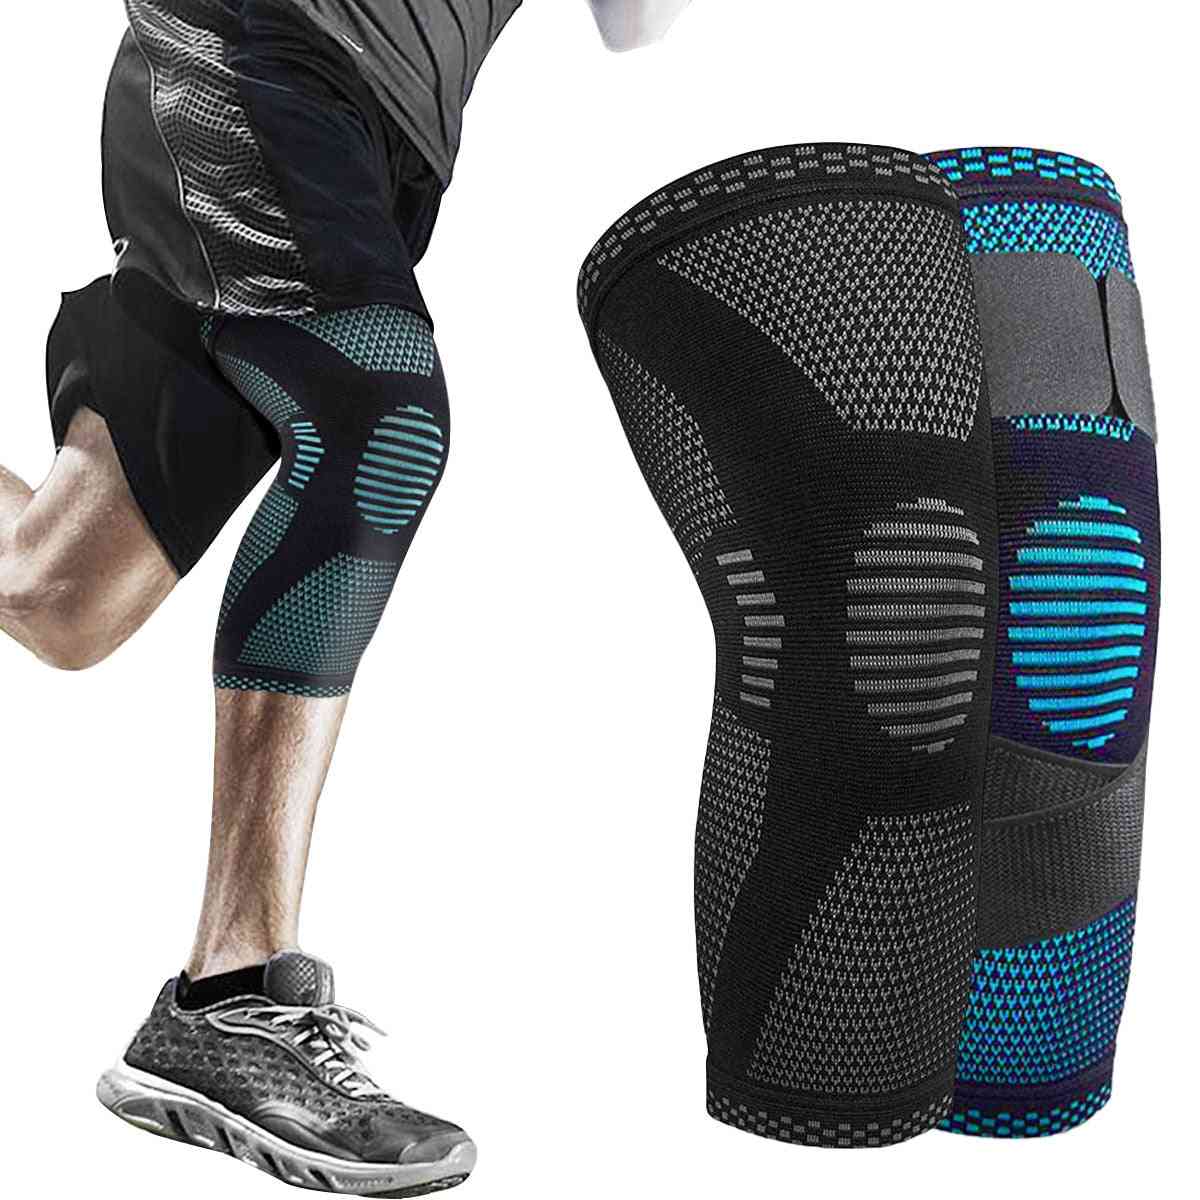 Gym Knee Pads Sports Safety Fitness